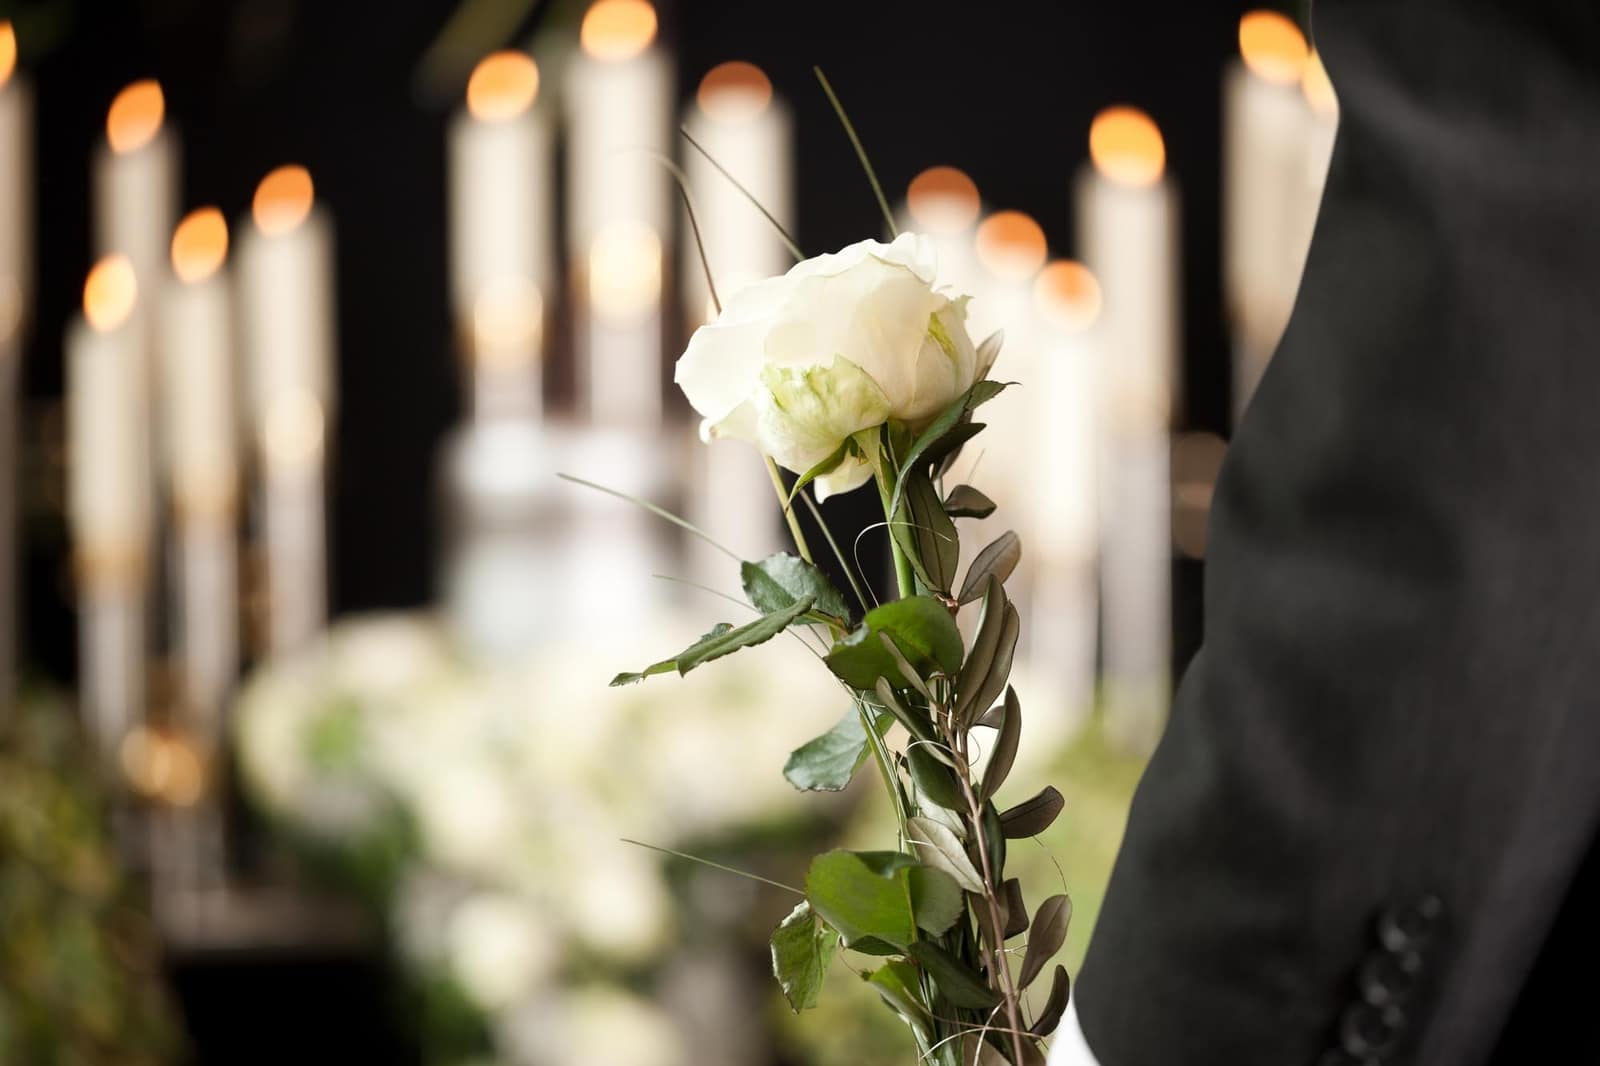 A man is holding a white rose in front of candles at a funeral.